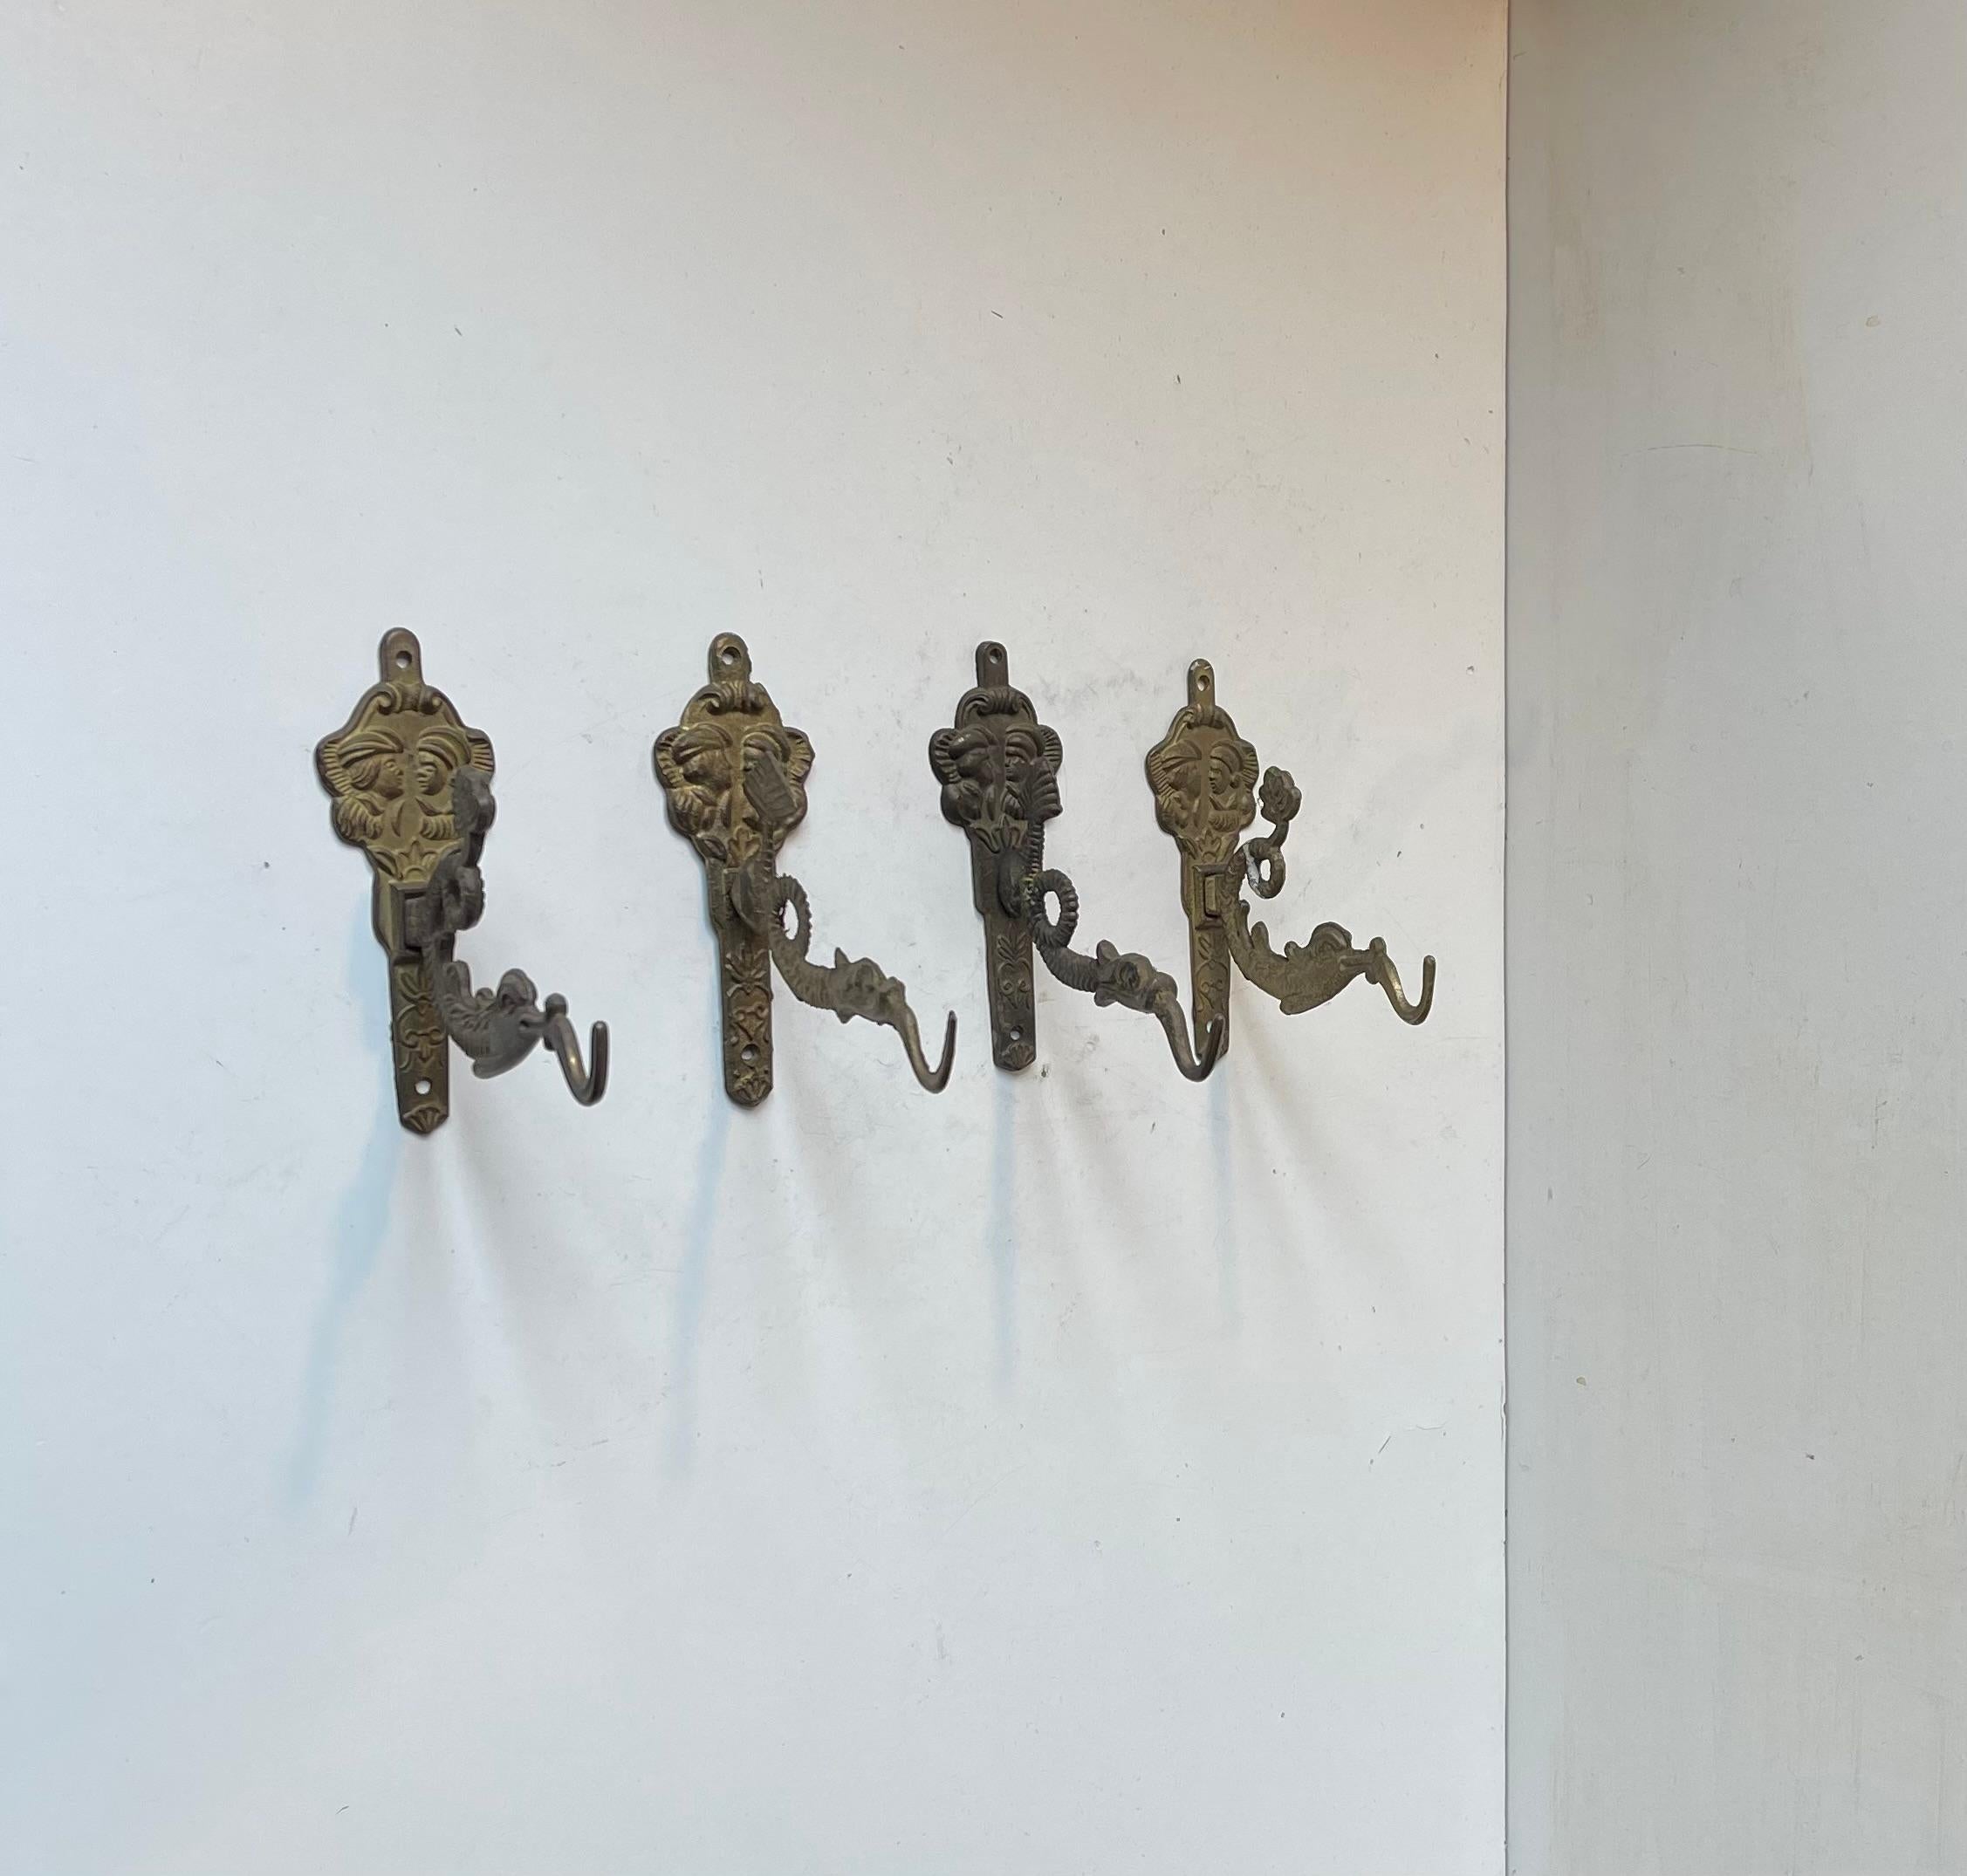 A set of 4 vintage wall hooks in brass. The hooks are made in the shape of dragons. They were cast and made in Asia between 1960-80. They have slight different features. Measurements: Dept/length: 11 cm (from the wall to the end of its tongue/fire.